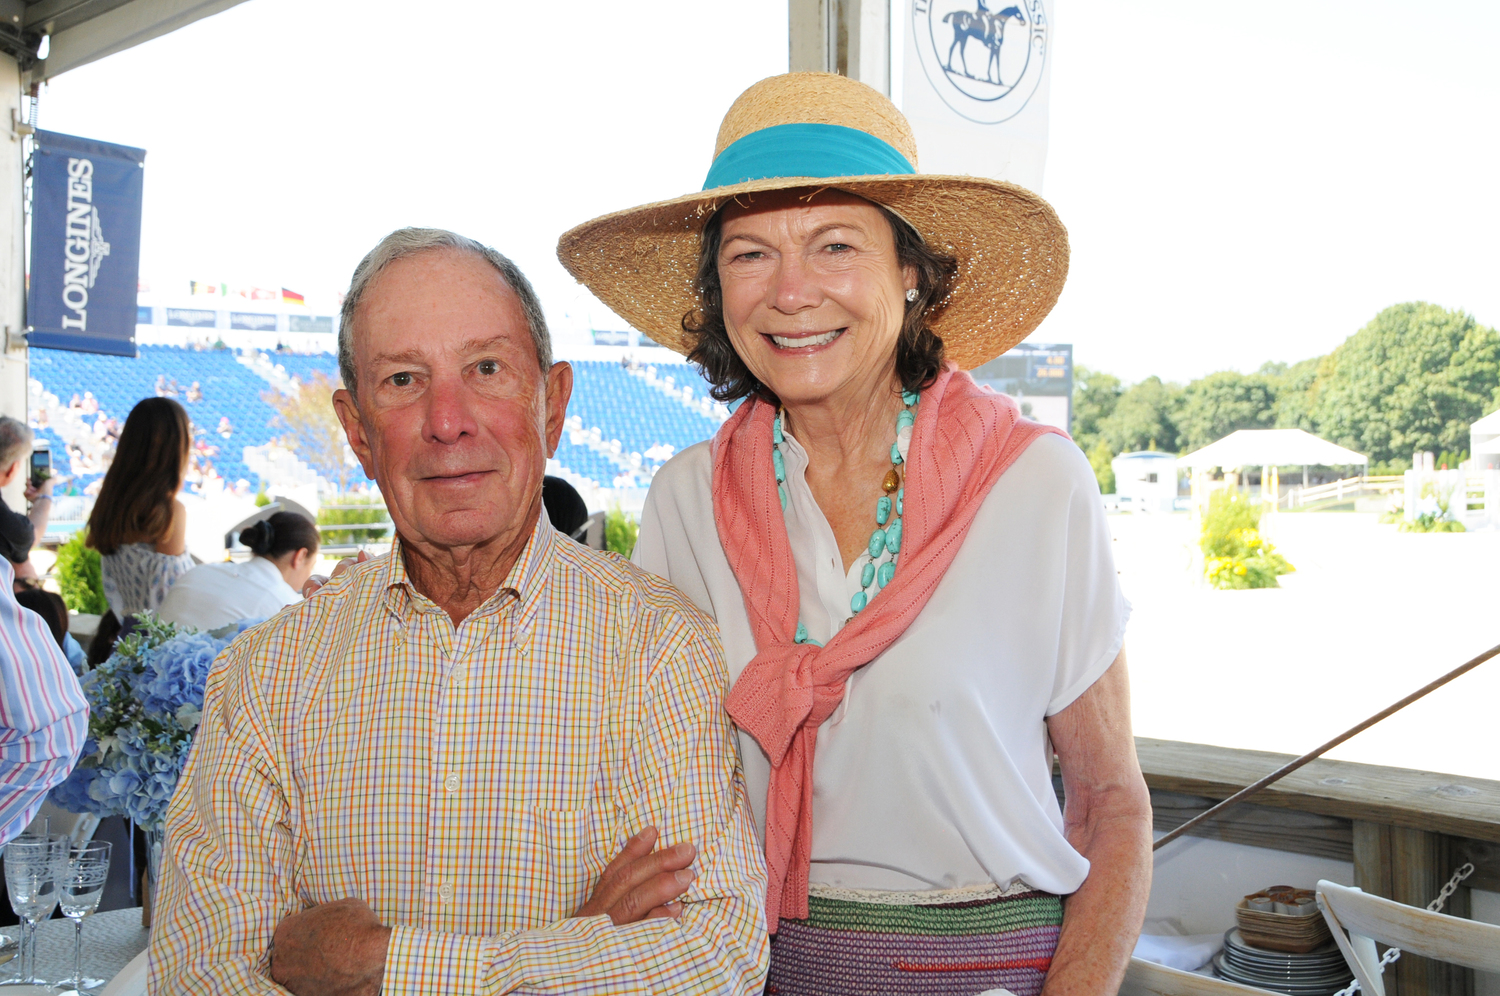 Former New York City Mayor Michael Bloomberg with Diana Taylor in the VIP Tent at the Grand Prix at the Hampton Classic Horse Show on Sunday.     RICHARD LEWIN